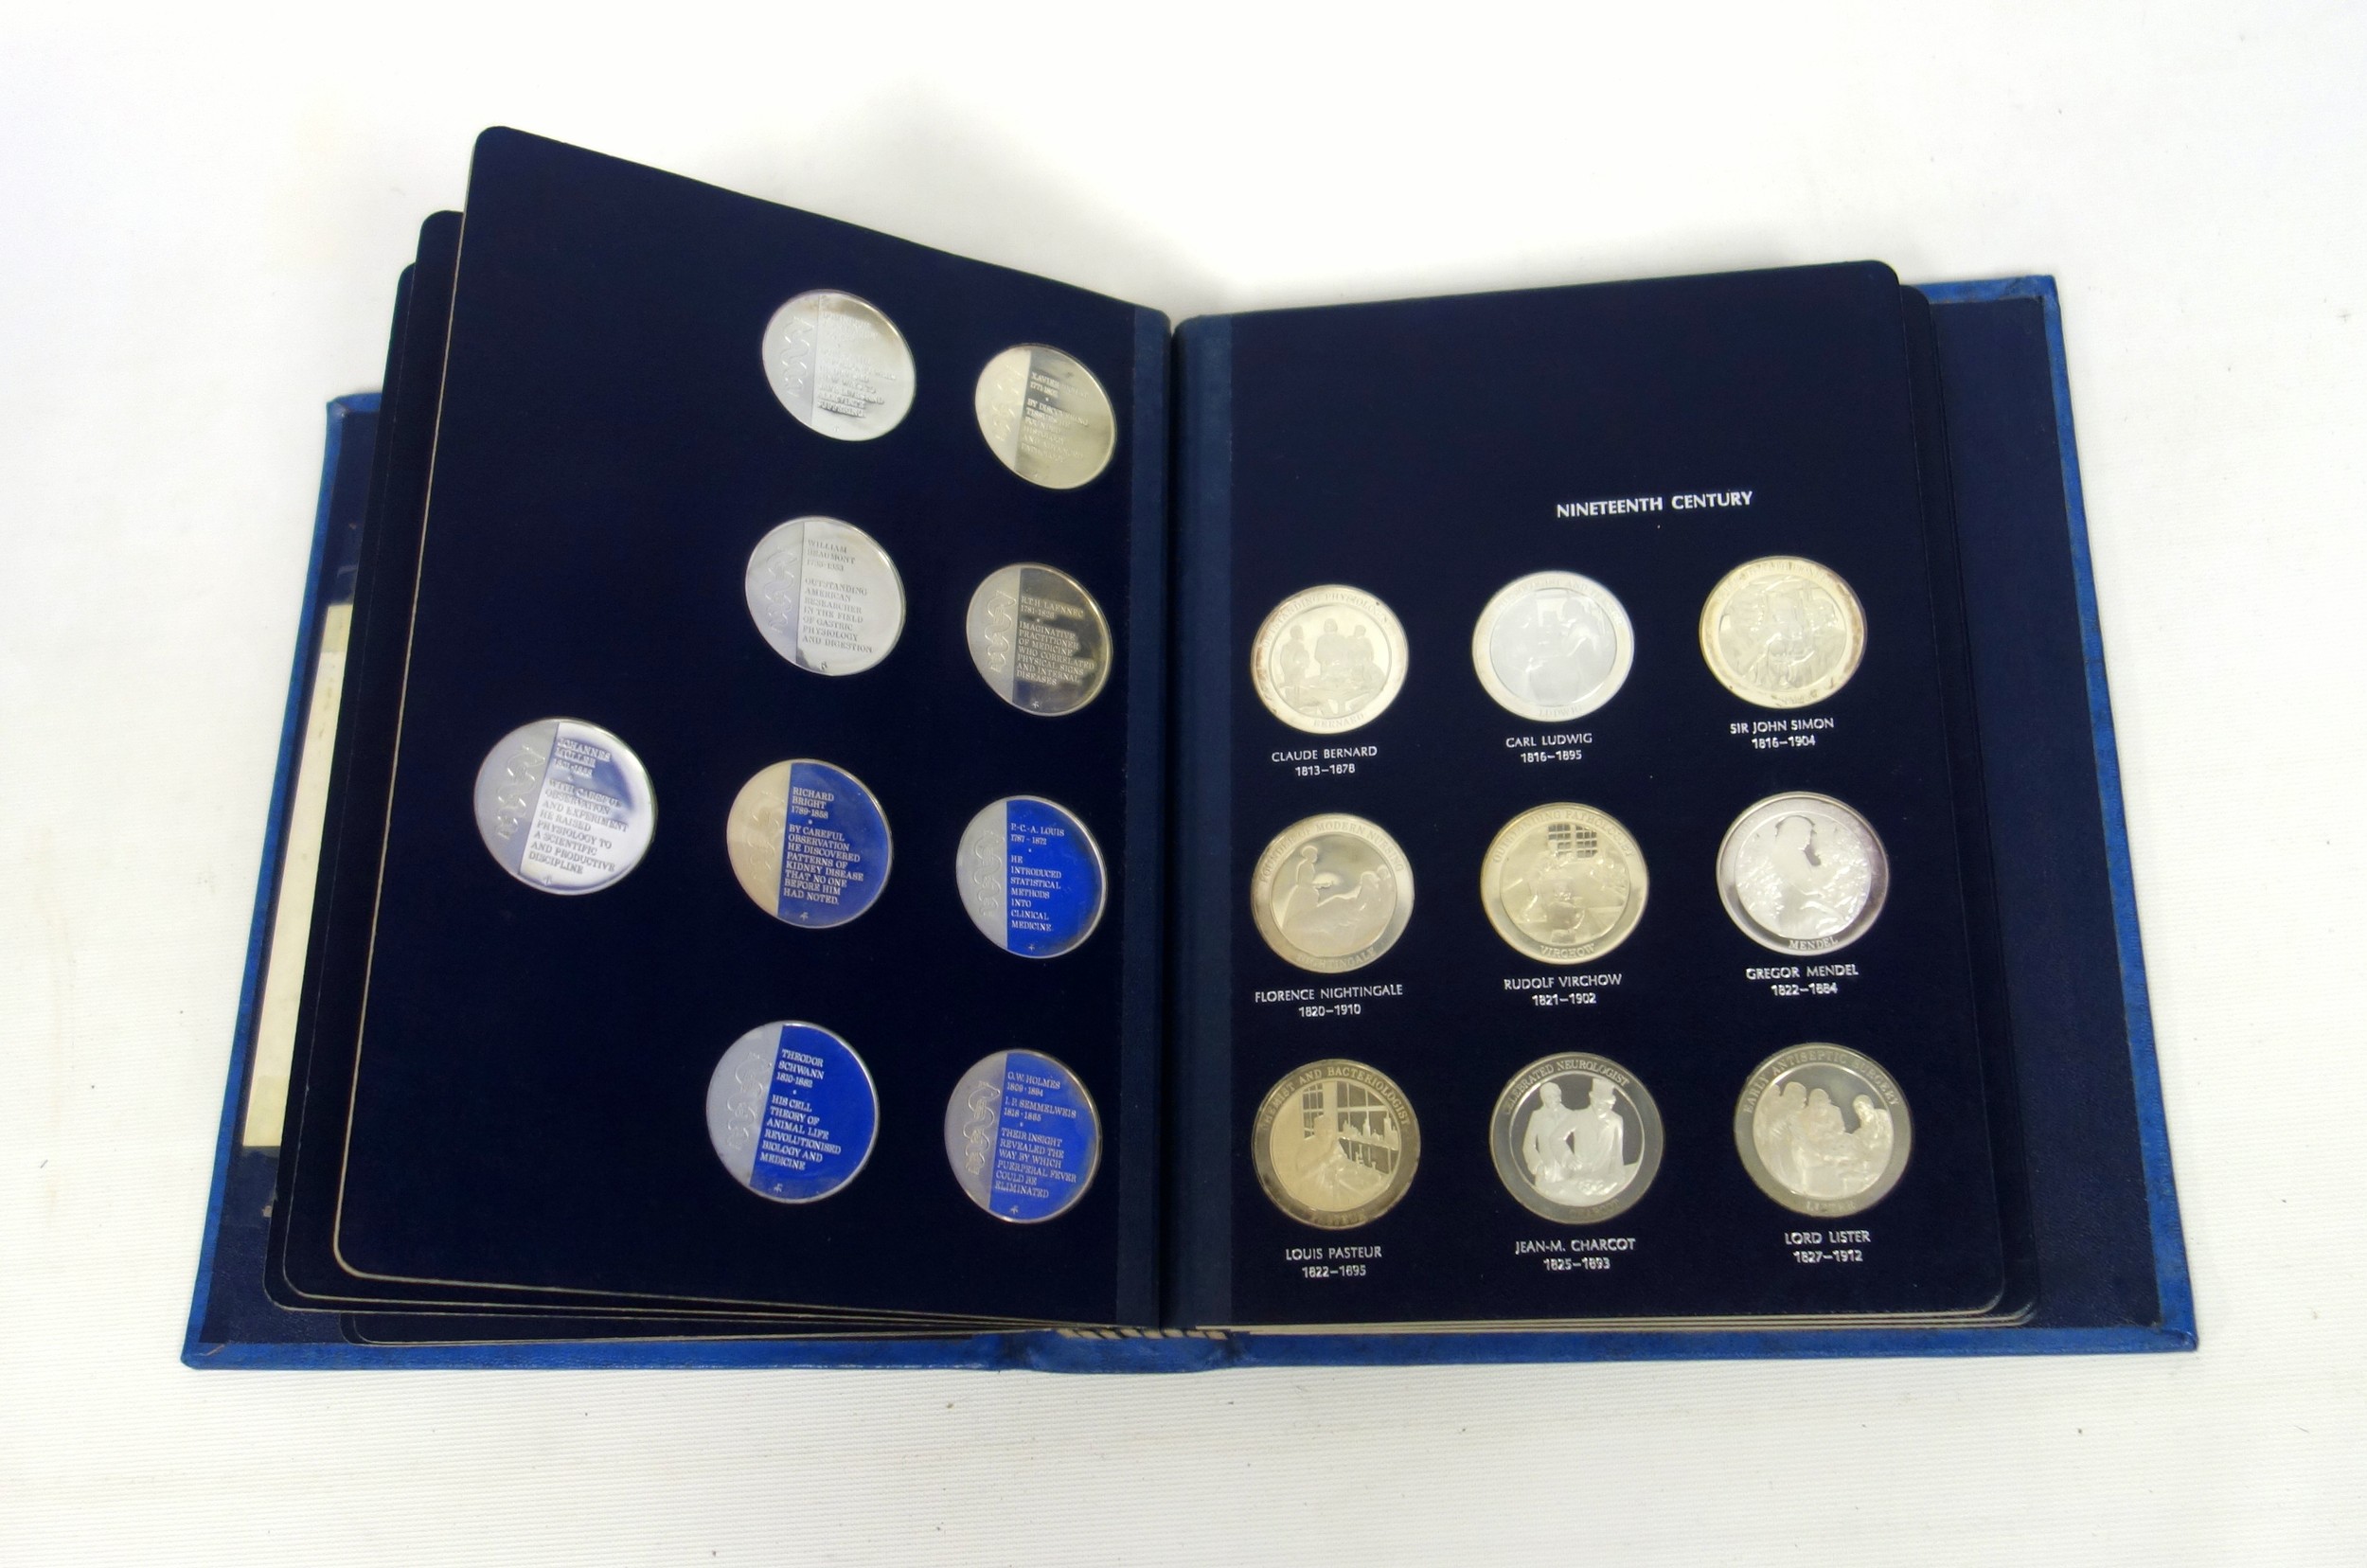 Systema Sciences Ltd. set of 66 Medallic History of Medicine silver special mint finish medals, - Image 8 of 11